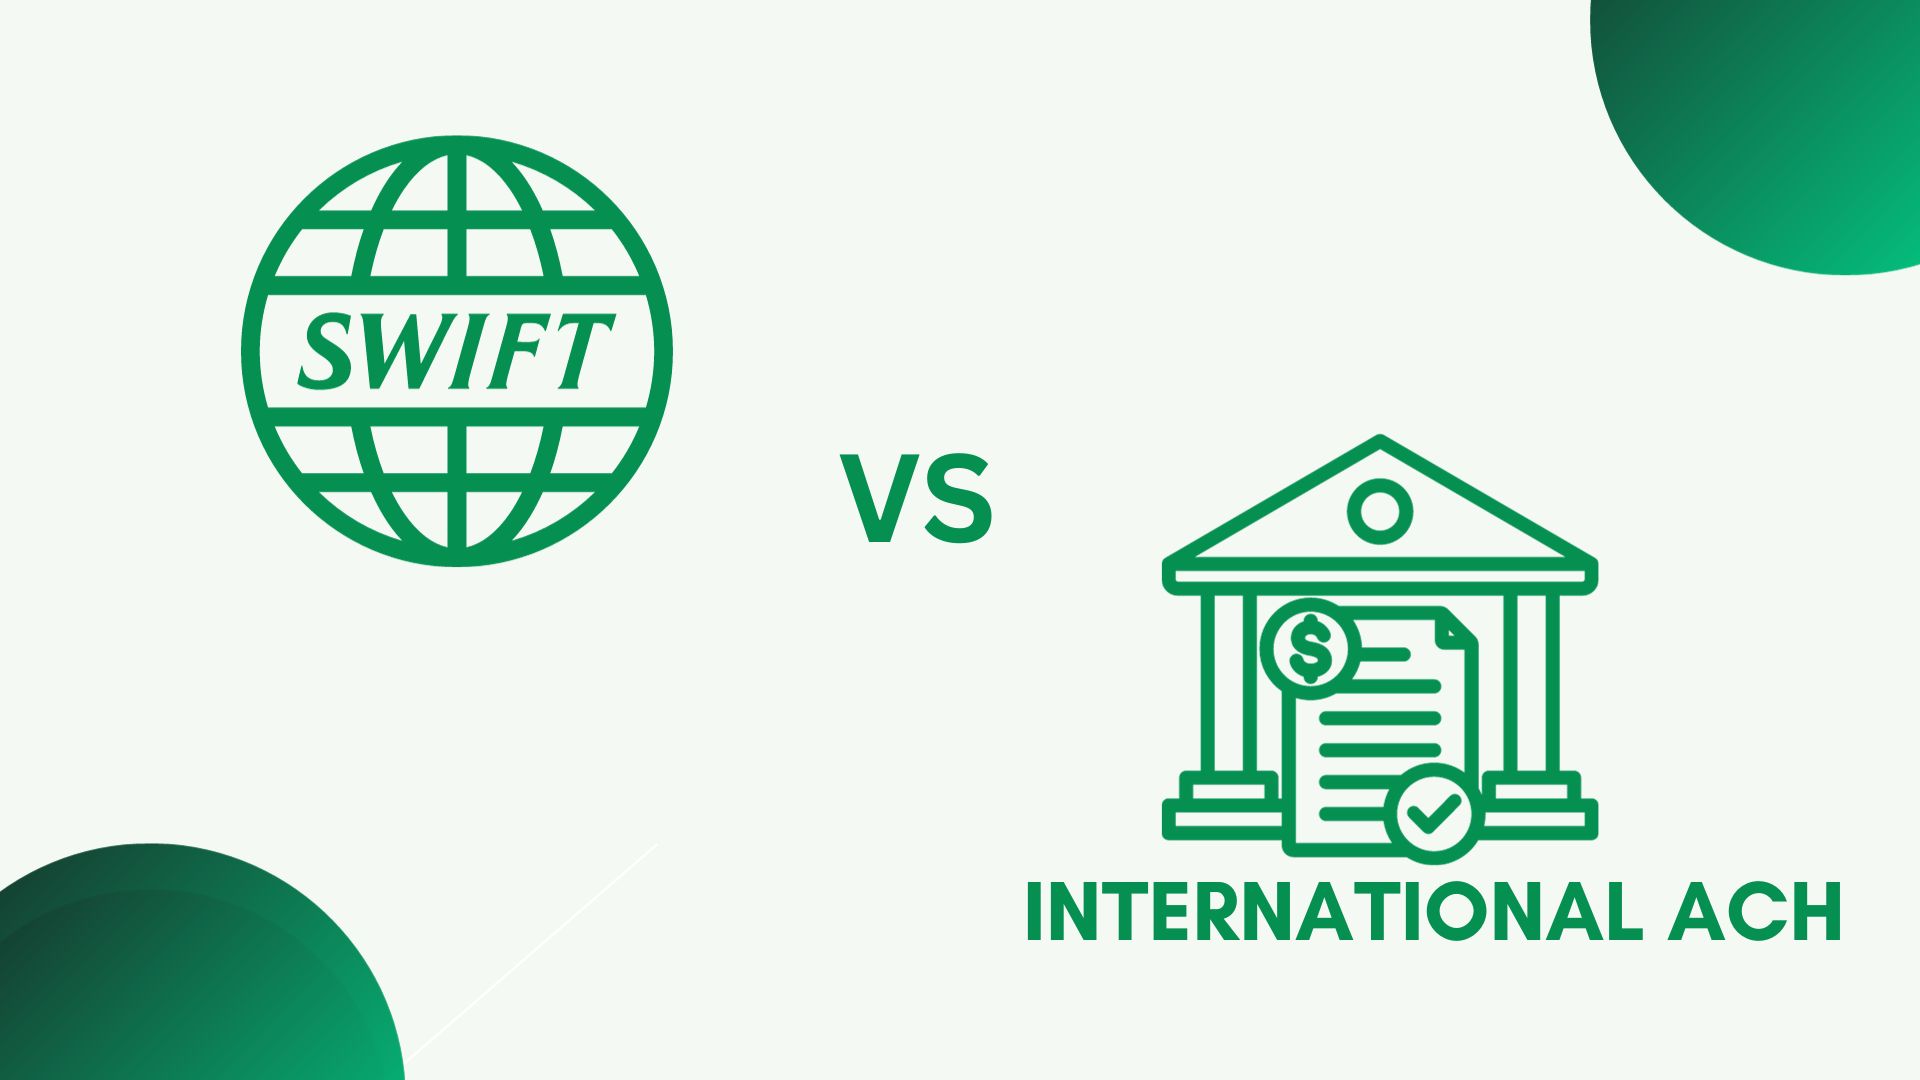 difference between International ACH and SWIFT